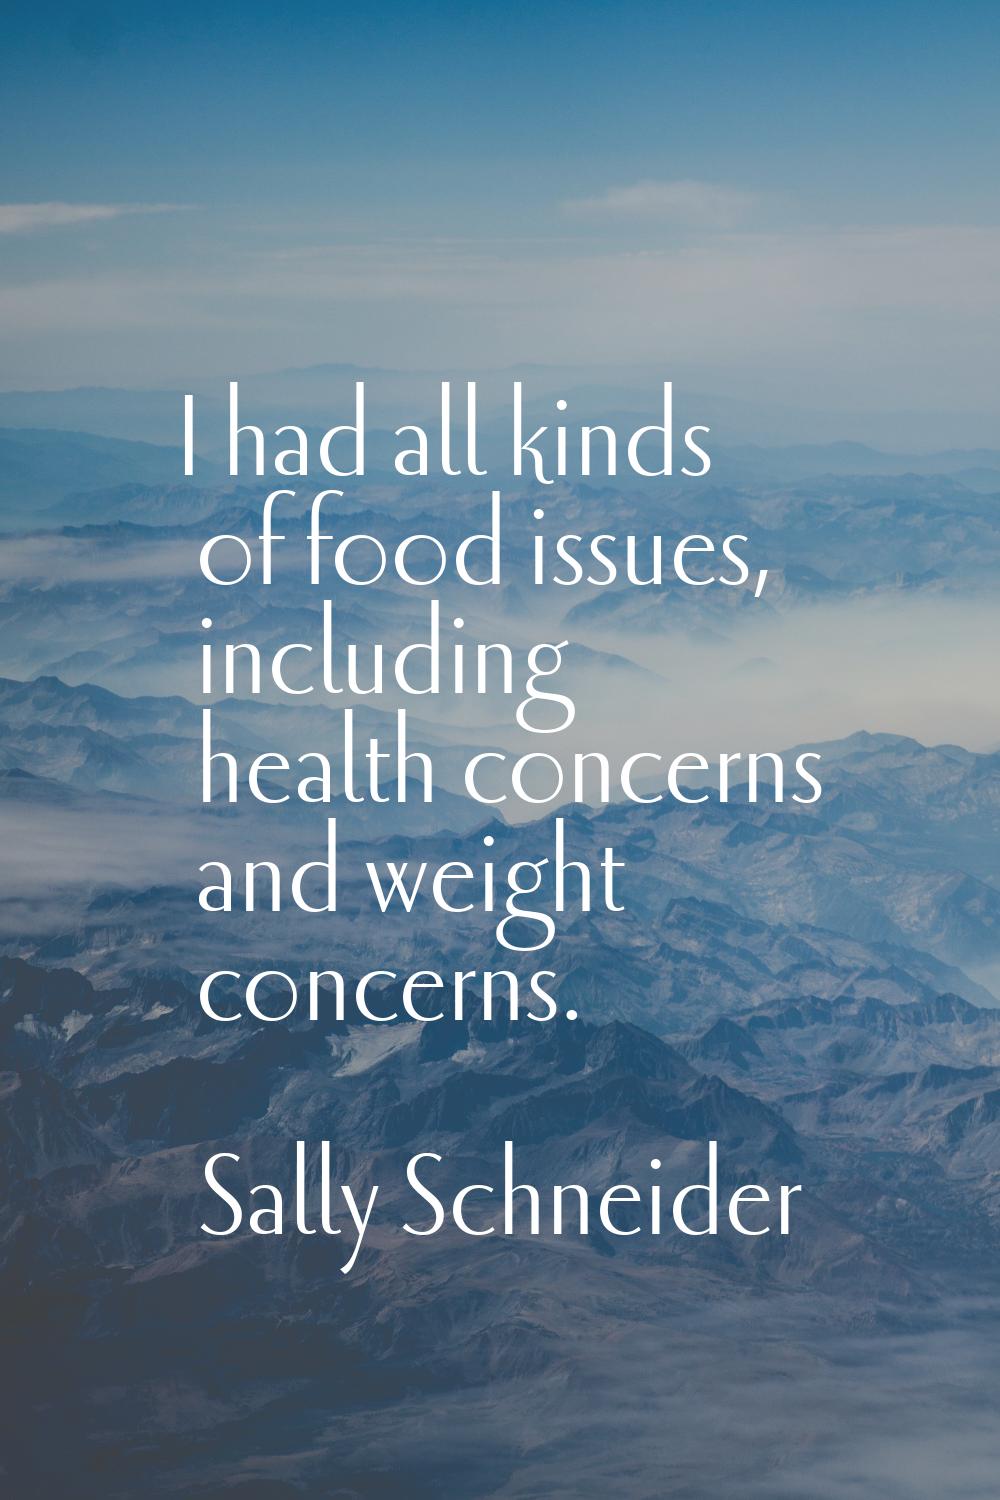 I had all kinds of food issues, including health concerns and weight concerns.